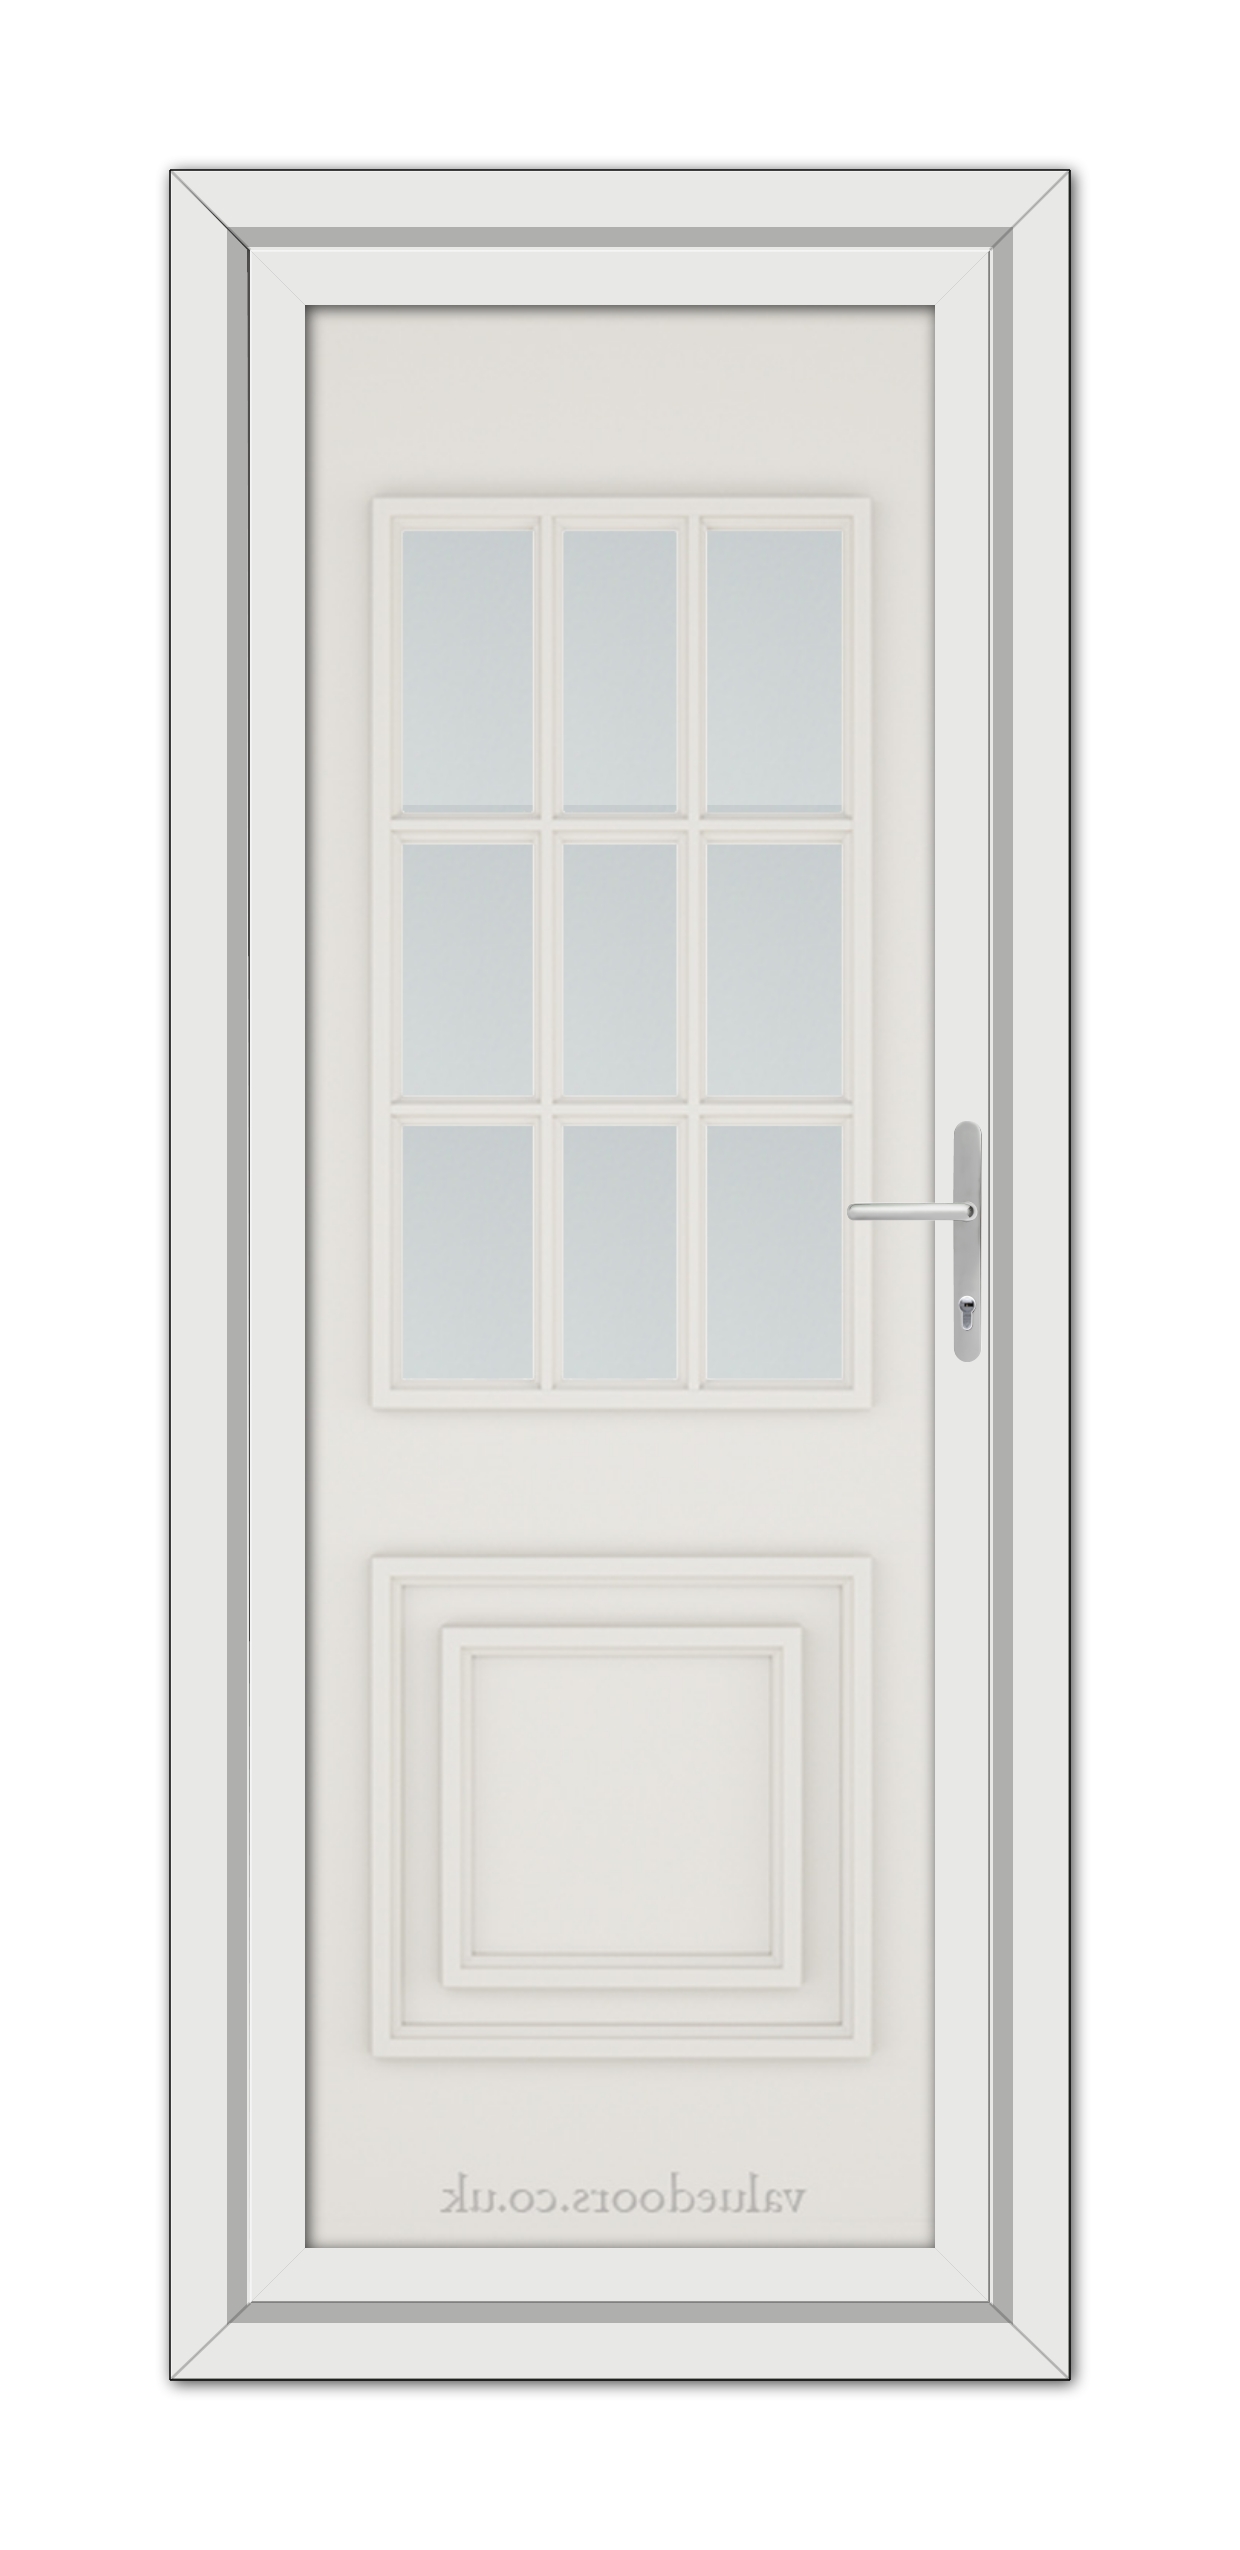 A vertical image of a closed White Cream Cambridge One uPVC Door with six frosted glass panes and a modern handle, set in a simple frame.